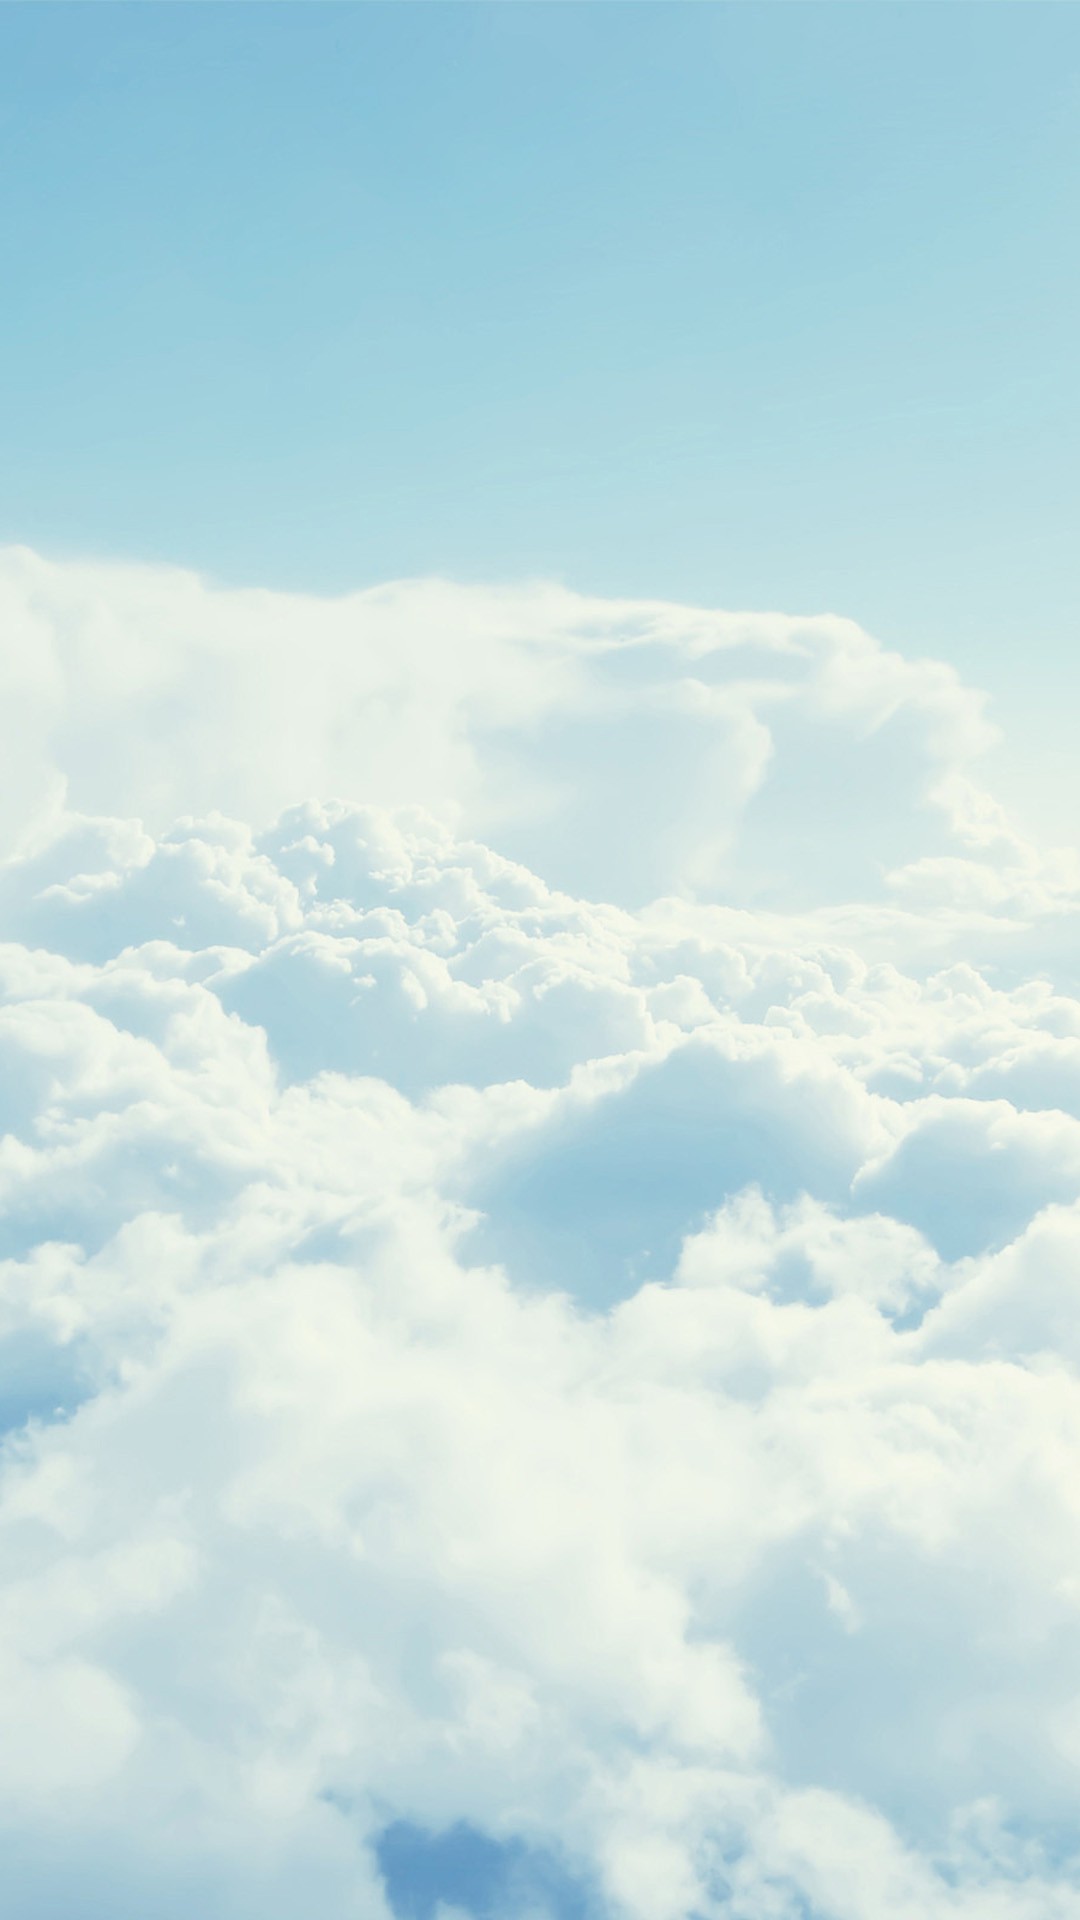 clouds iphone wallpapers blank sky 1080 1920 pixelstalk puffy undefined adorable